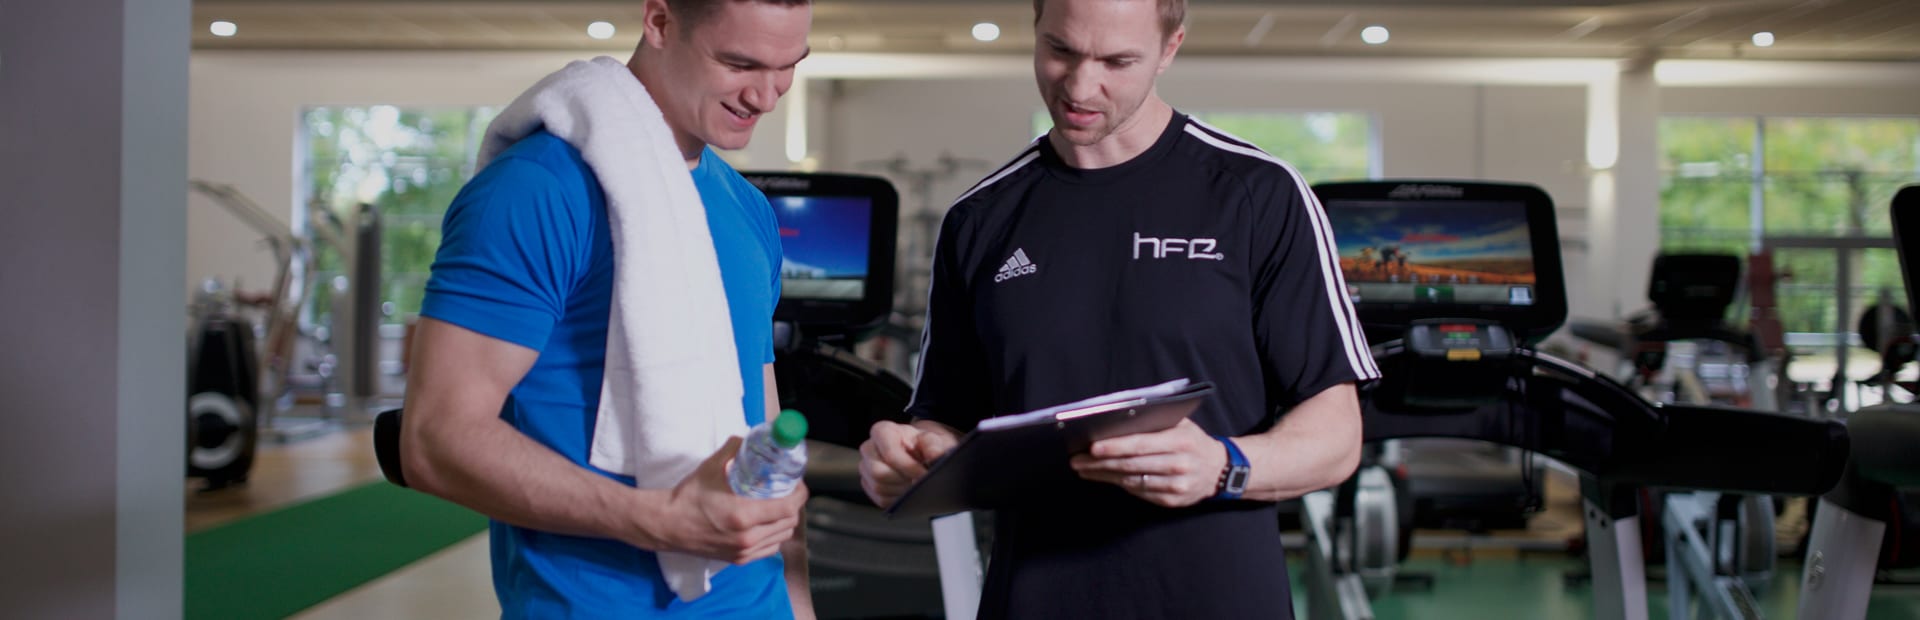 HFE tutor looking at a personal trainer's business and marketing plan